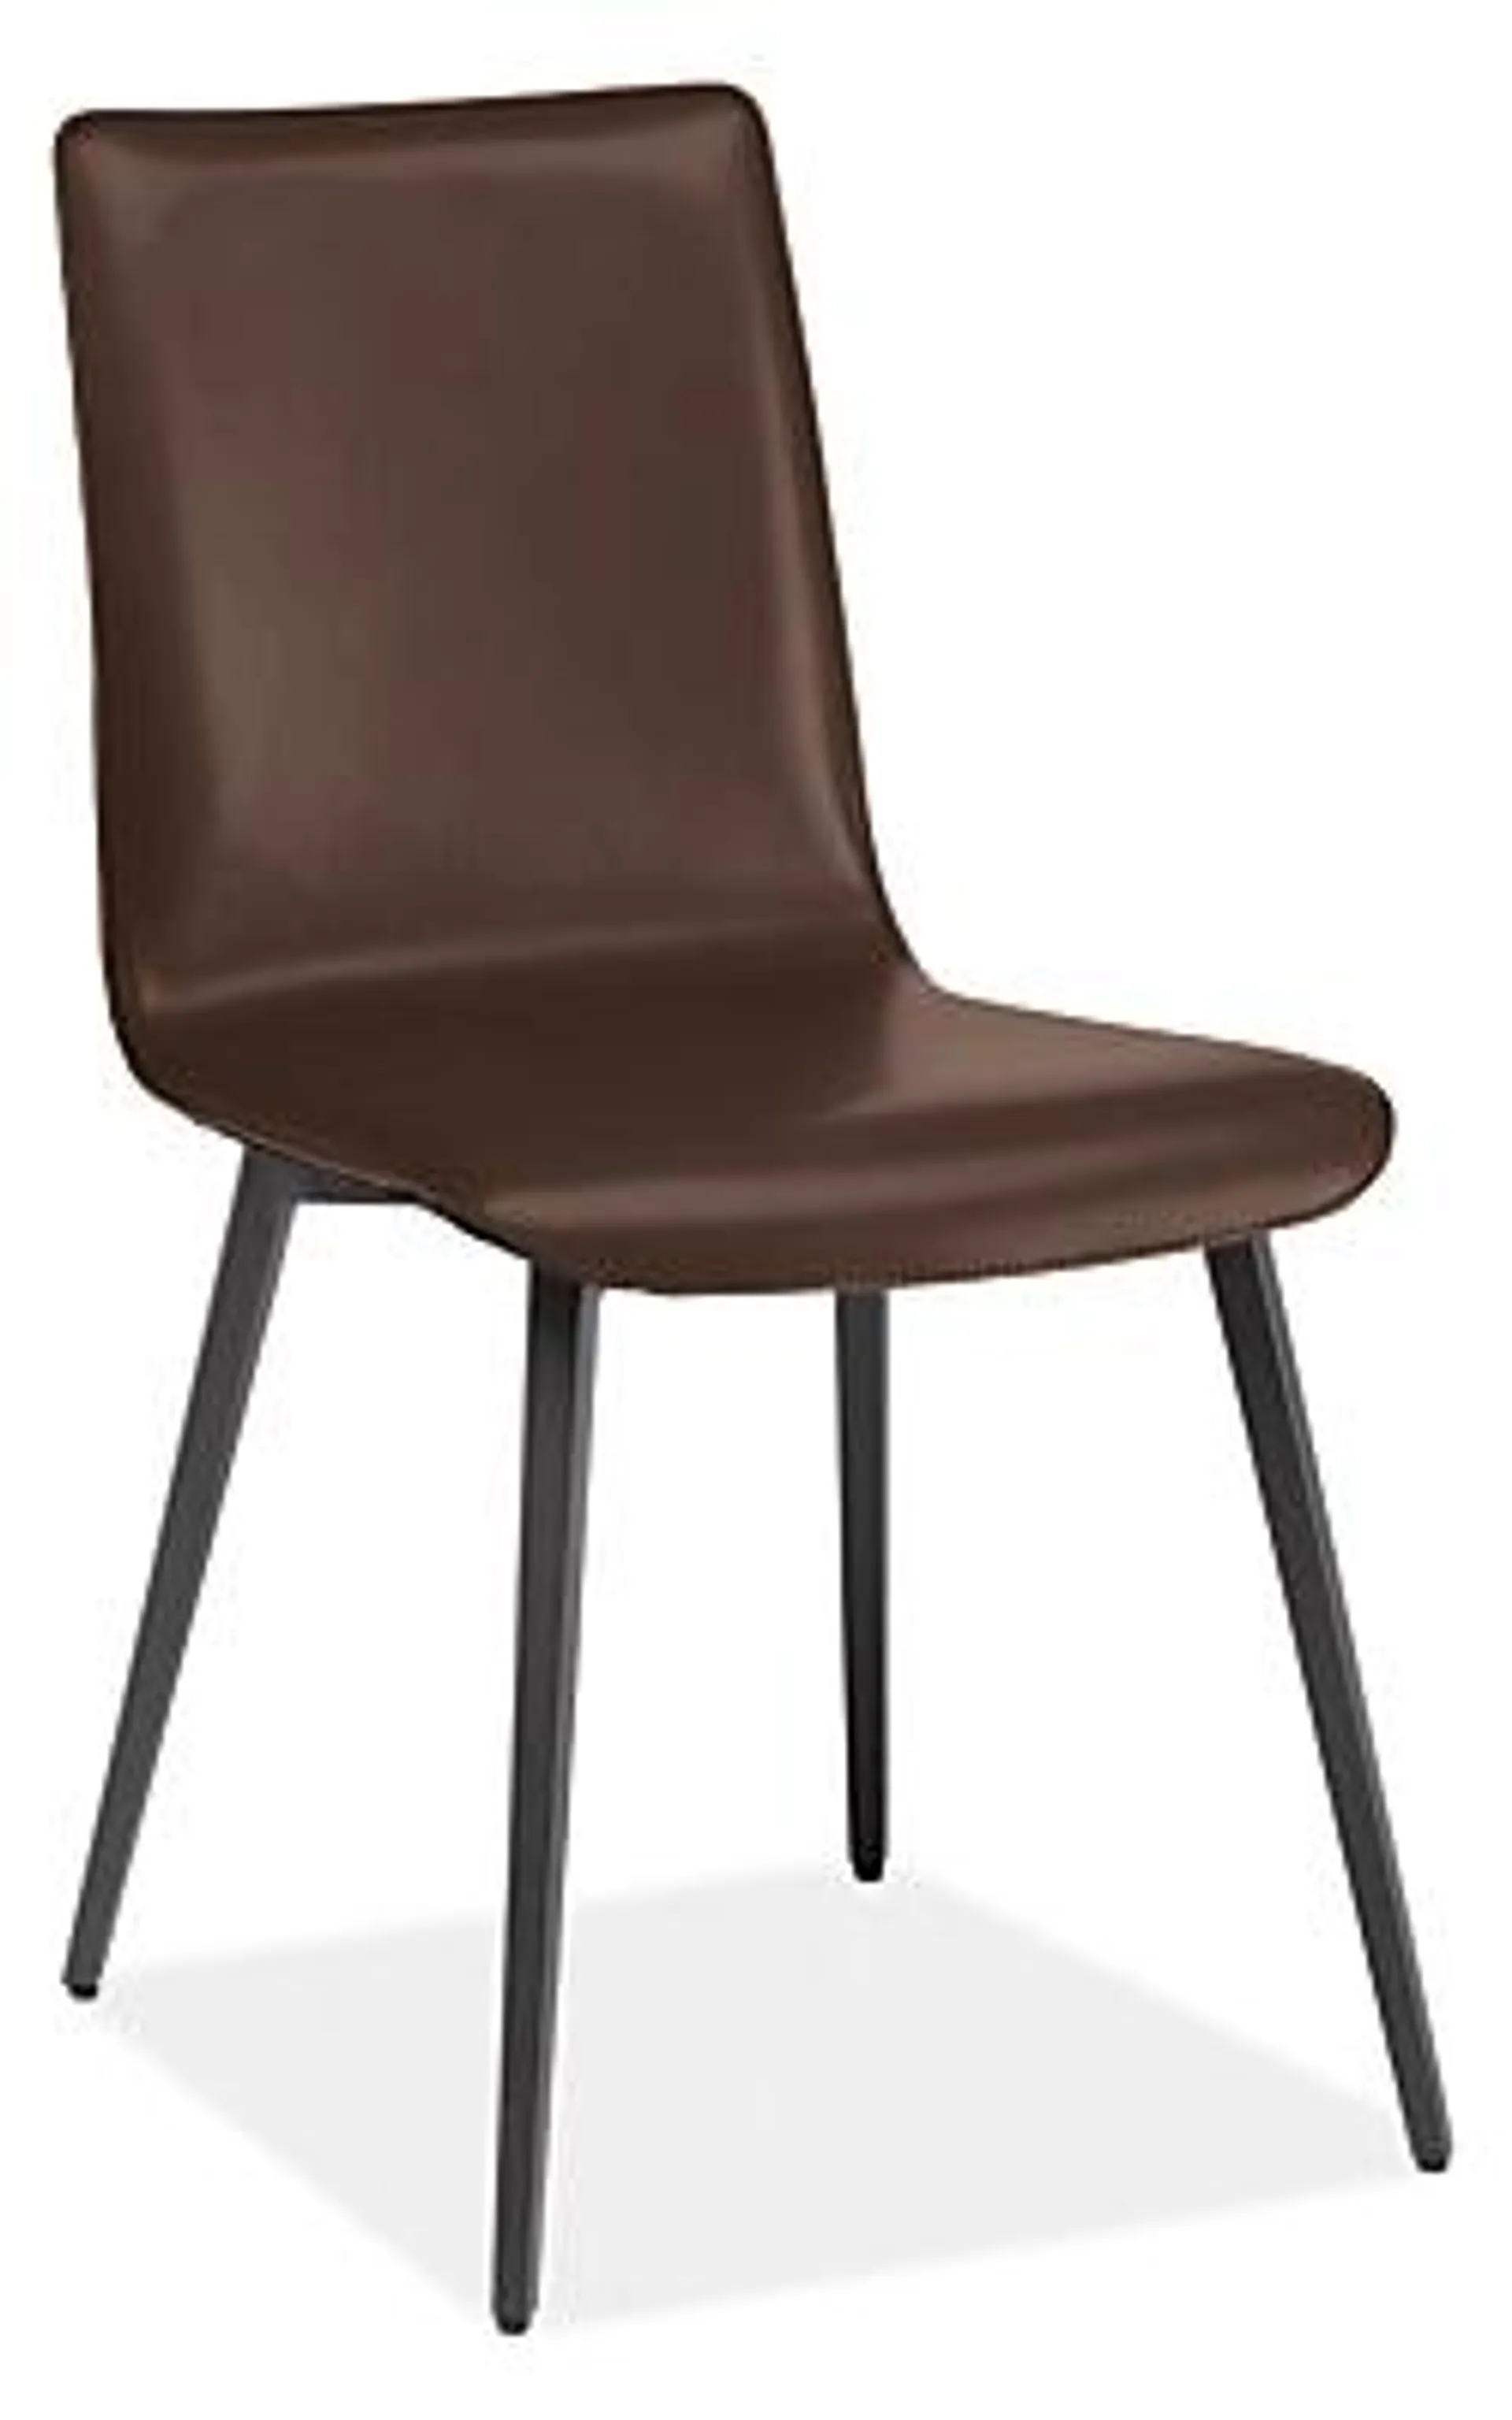 Hirsch Side Chair in Brown with Metal Legs